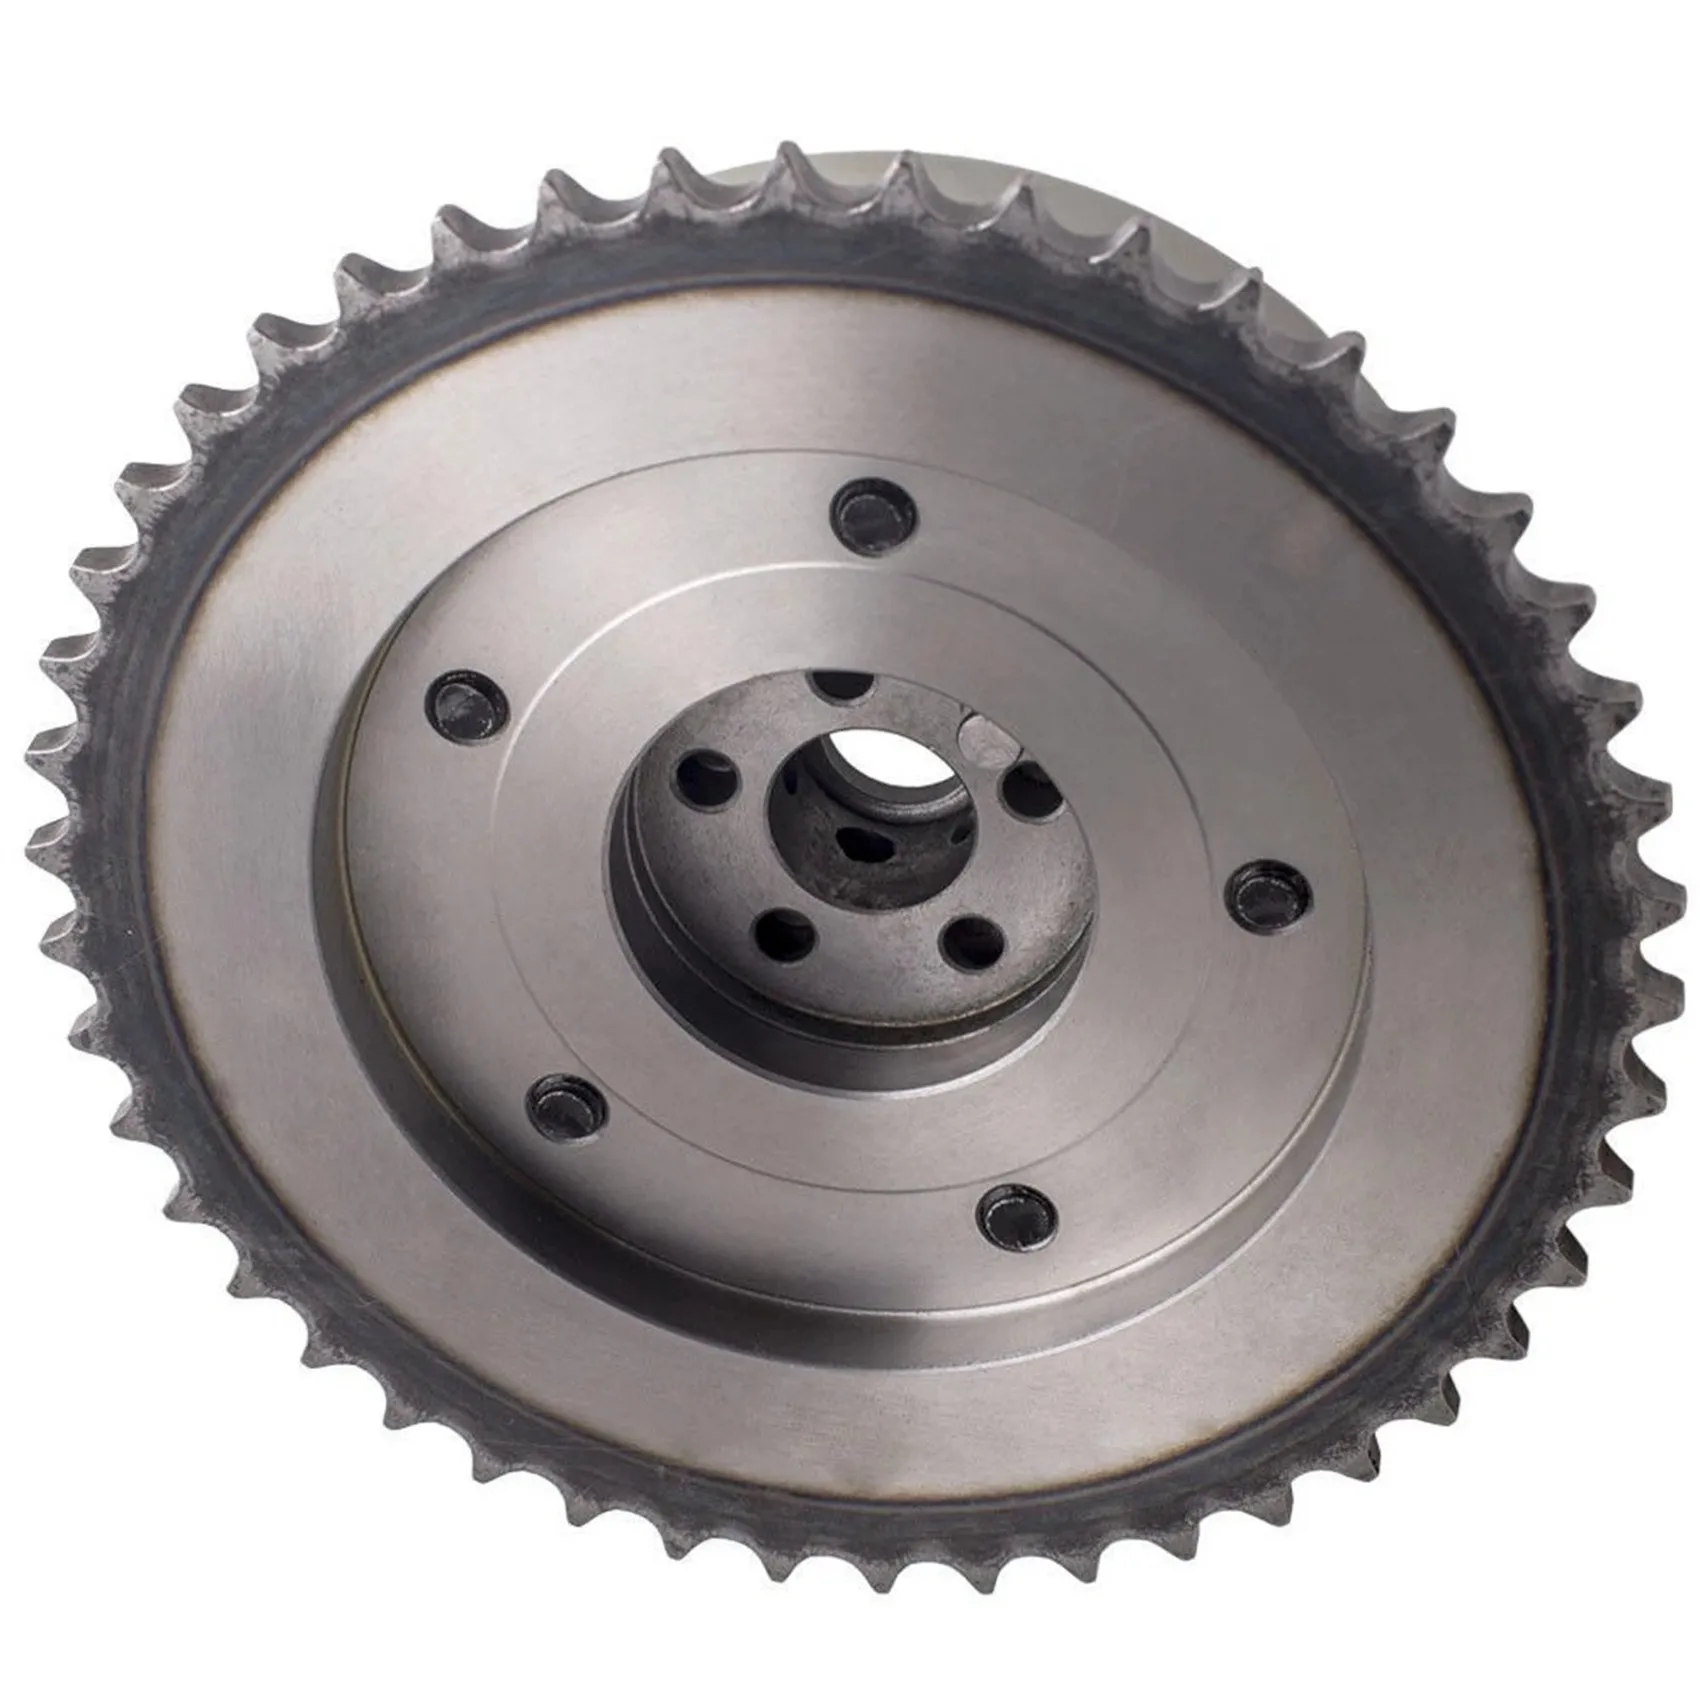 

Engine Variable Timing Sprocket Camshaft for Verano Chevy 12621505, 12578516